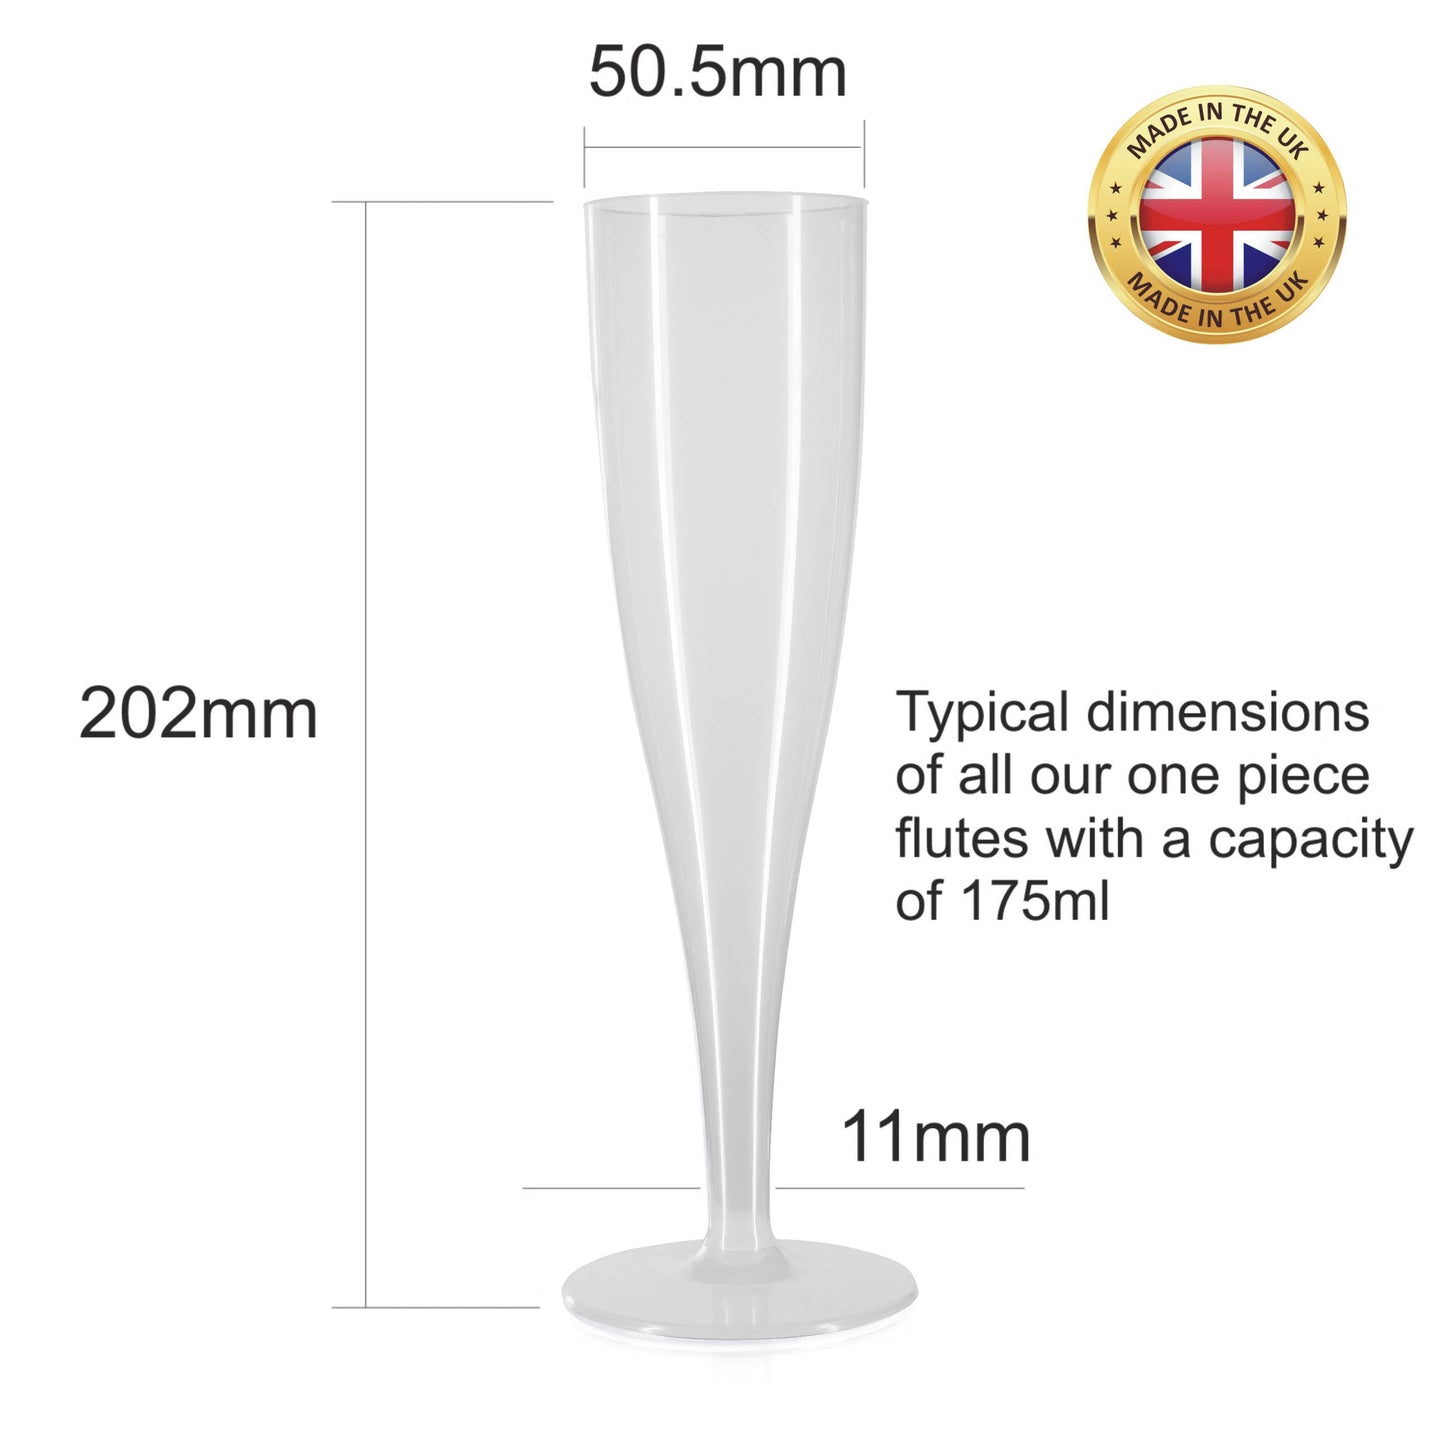 20 x White Prosecco Flutes – Biodegradable Material - Disposable – Glossy Bright White Prosecco Glass - One Piece – Pack of 20-5056020187950-EY-PP-213-Product Pro-Champagne Flute, Champagne Glasses, Flutes, Prosecco Flute, Prosecco Glasses, White Flutes